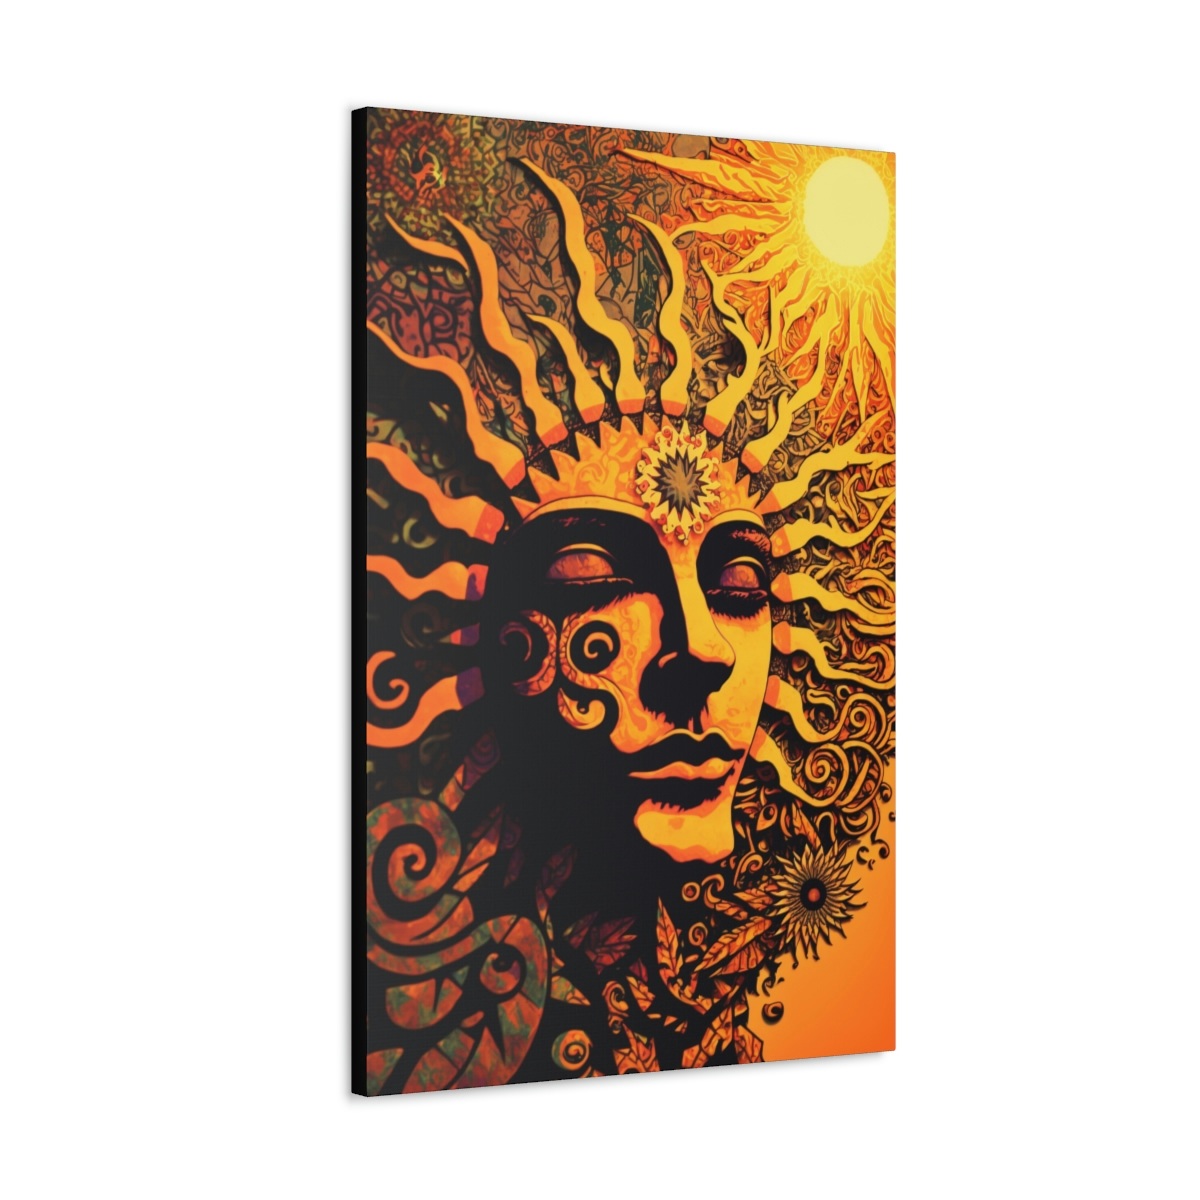 Trippy Art Canvas Print: Daughter Of The Sun